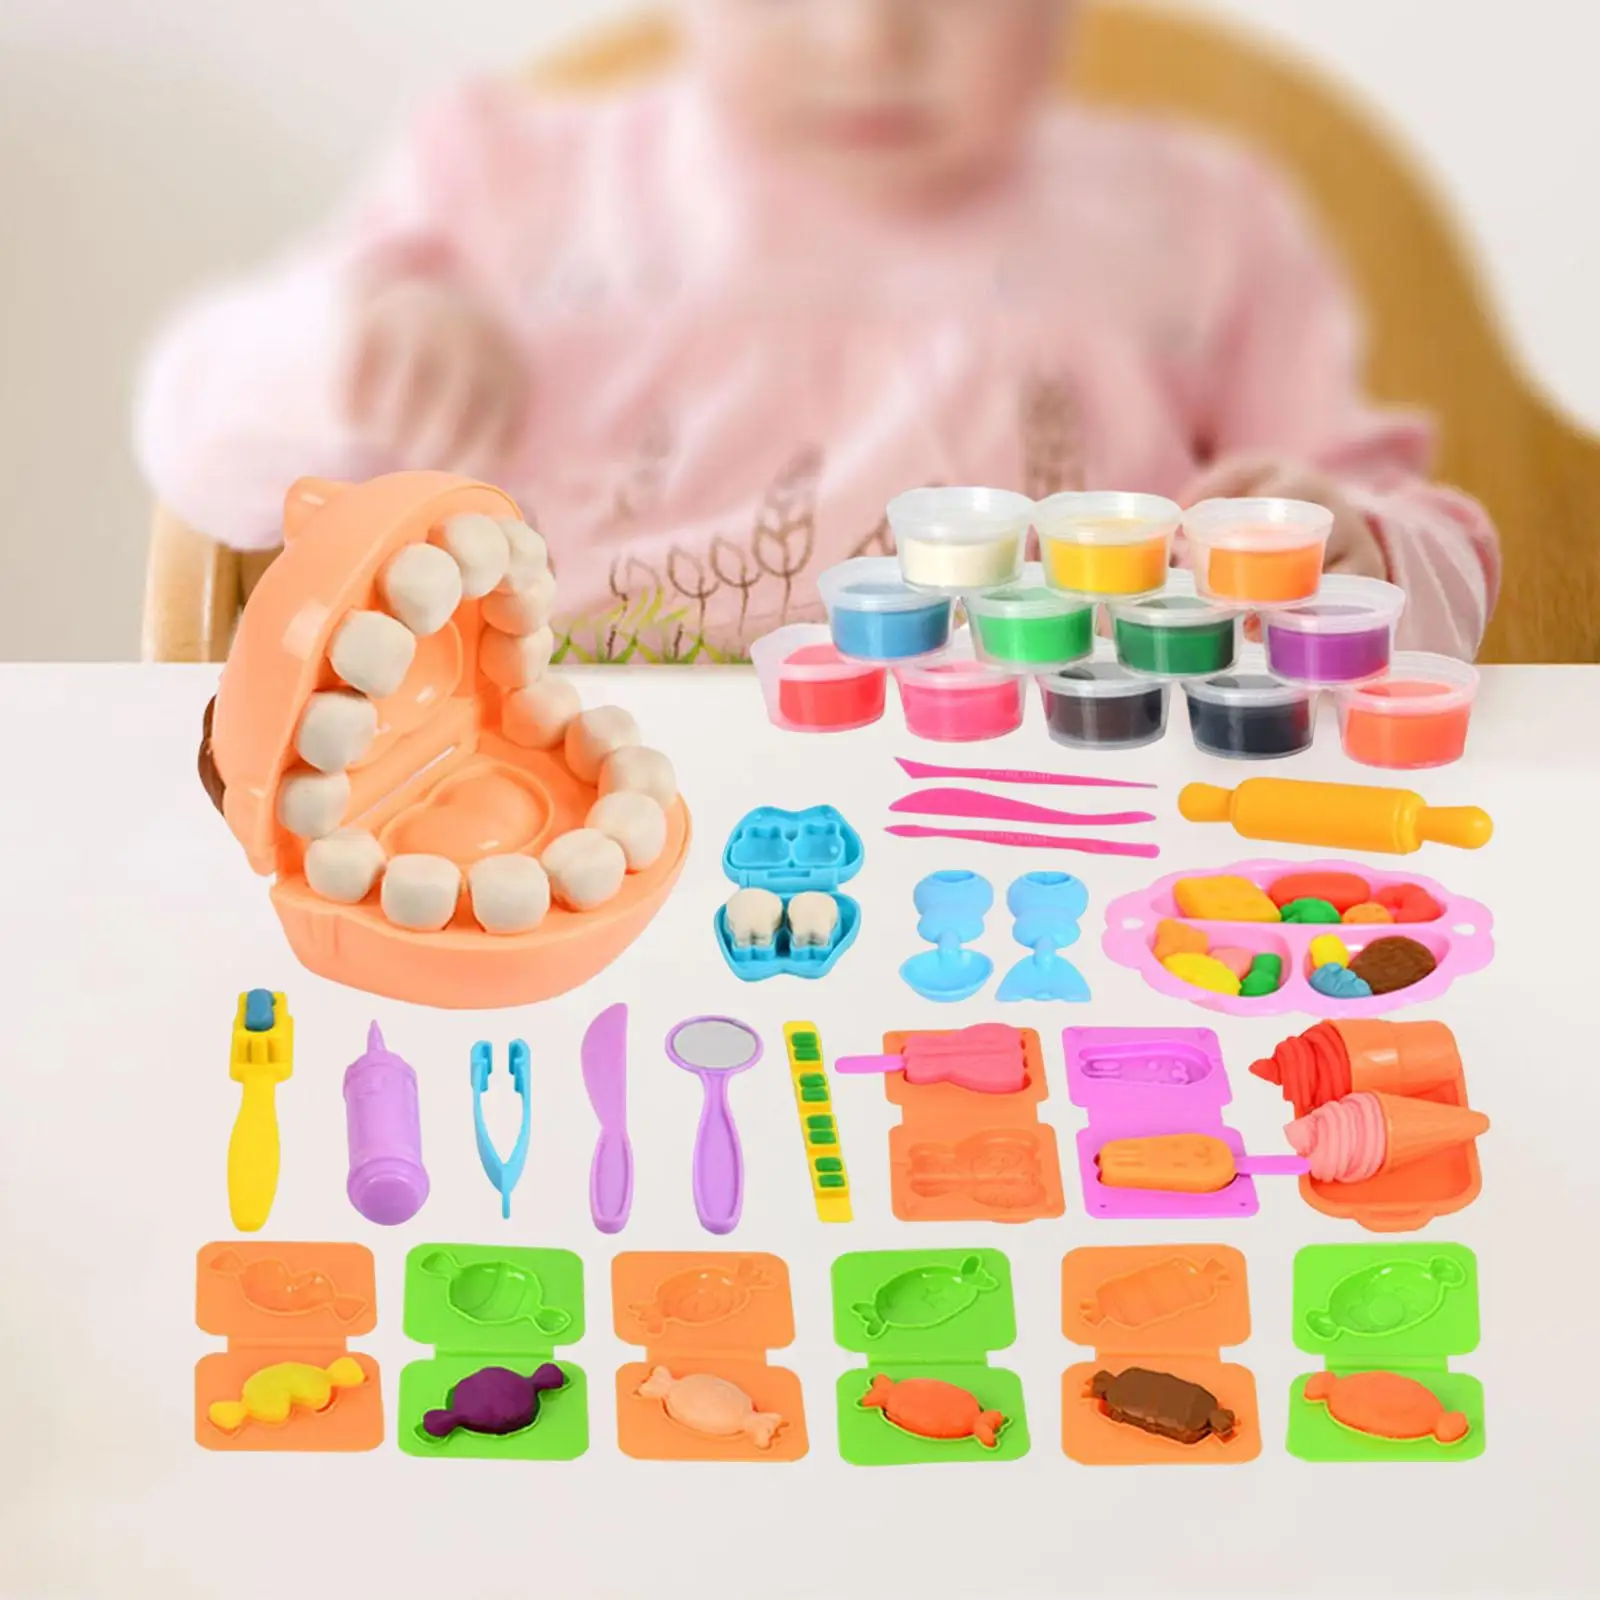 Clay Set DIY Models Educational 12 Colors Pretend Play Color Play Set Art Crafts for Birthday Toddlers Kids Girl Gift